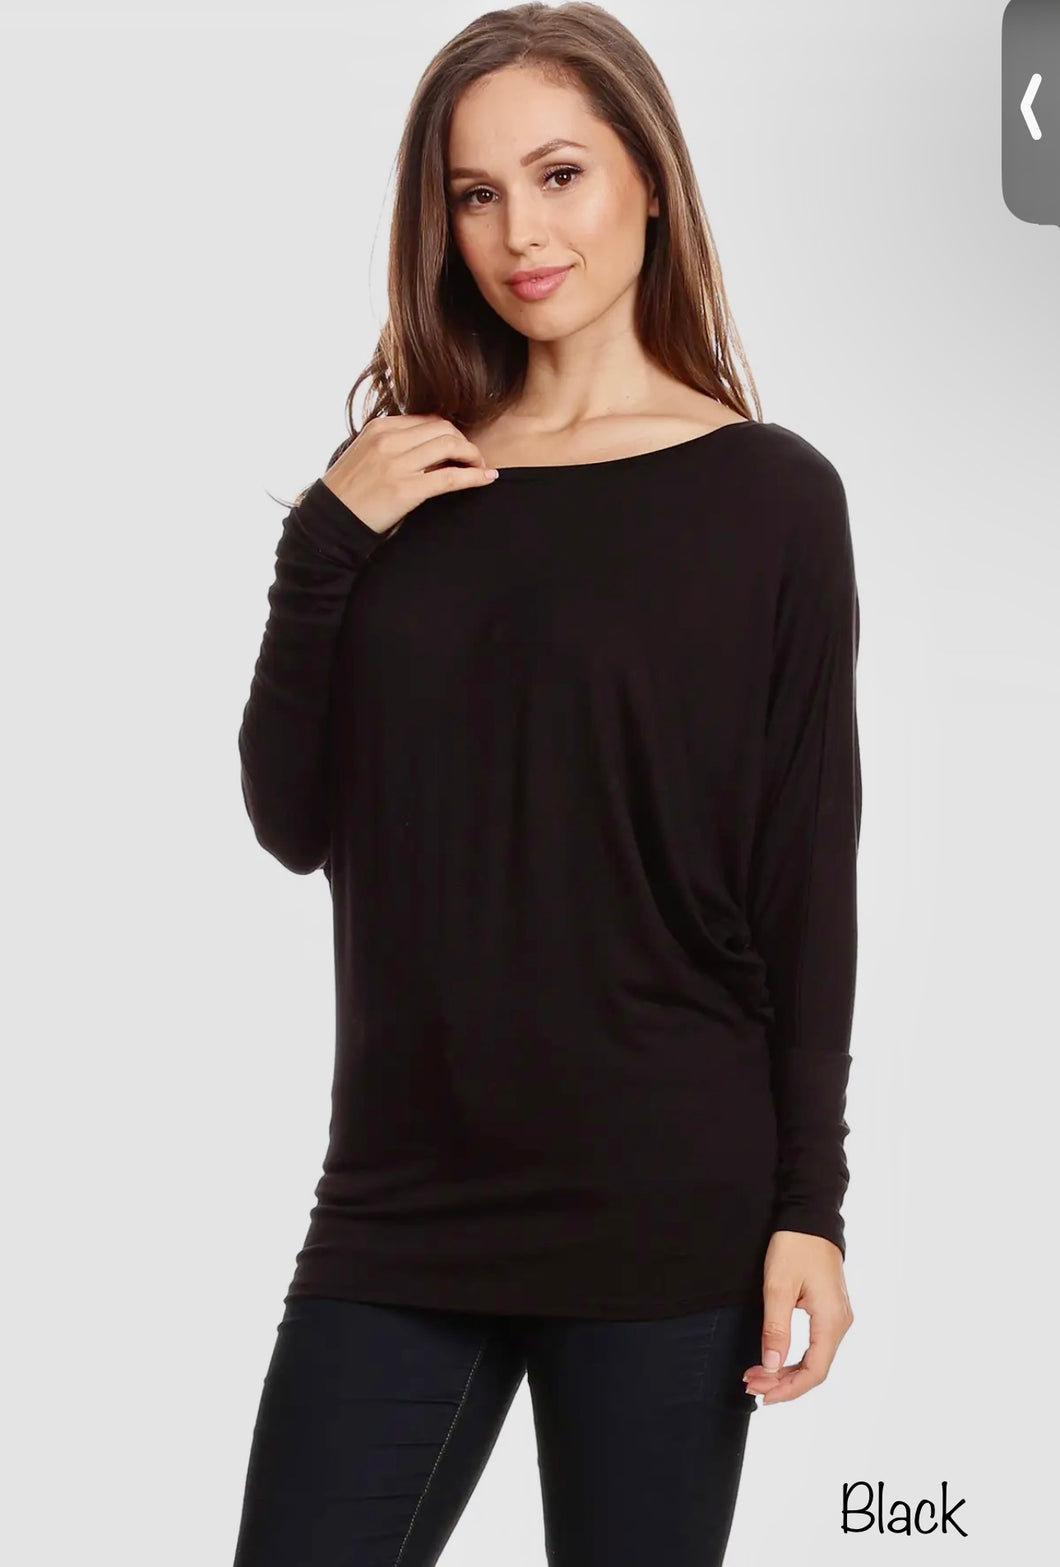 *STEAL!* Tuning In Tunic Top (2 colorways!)